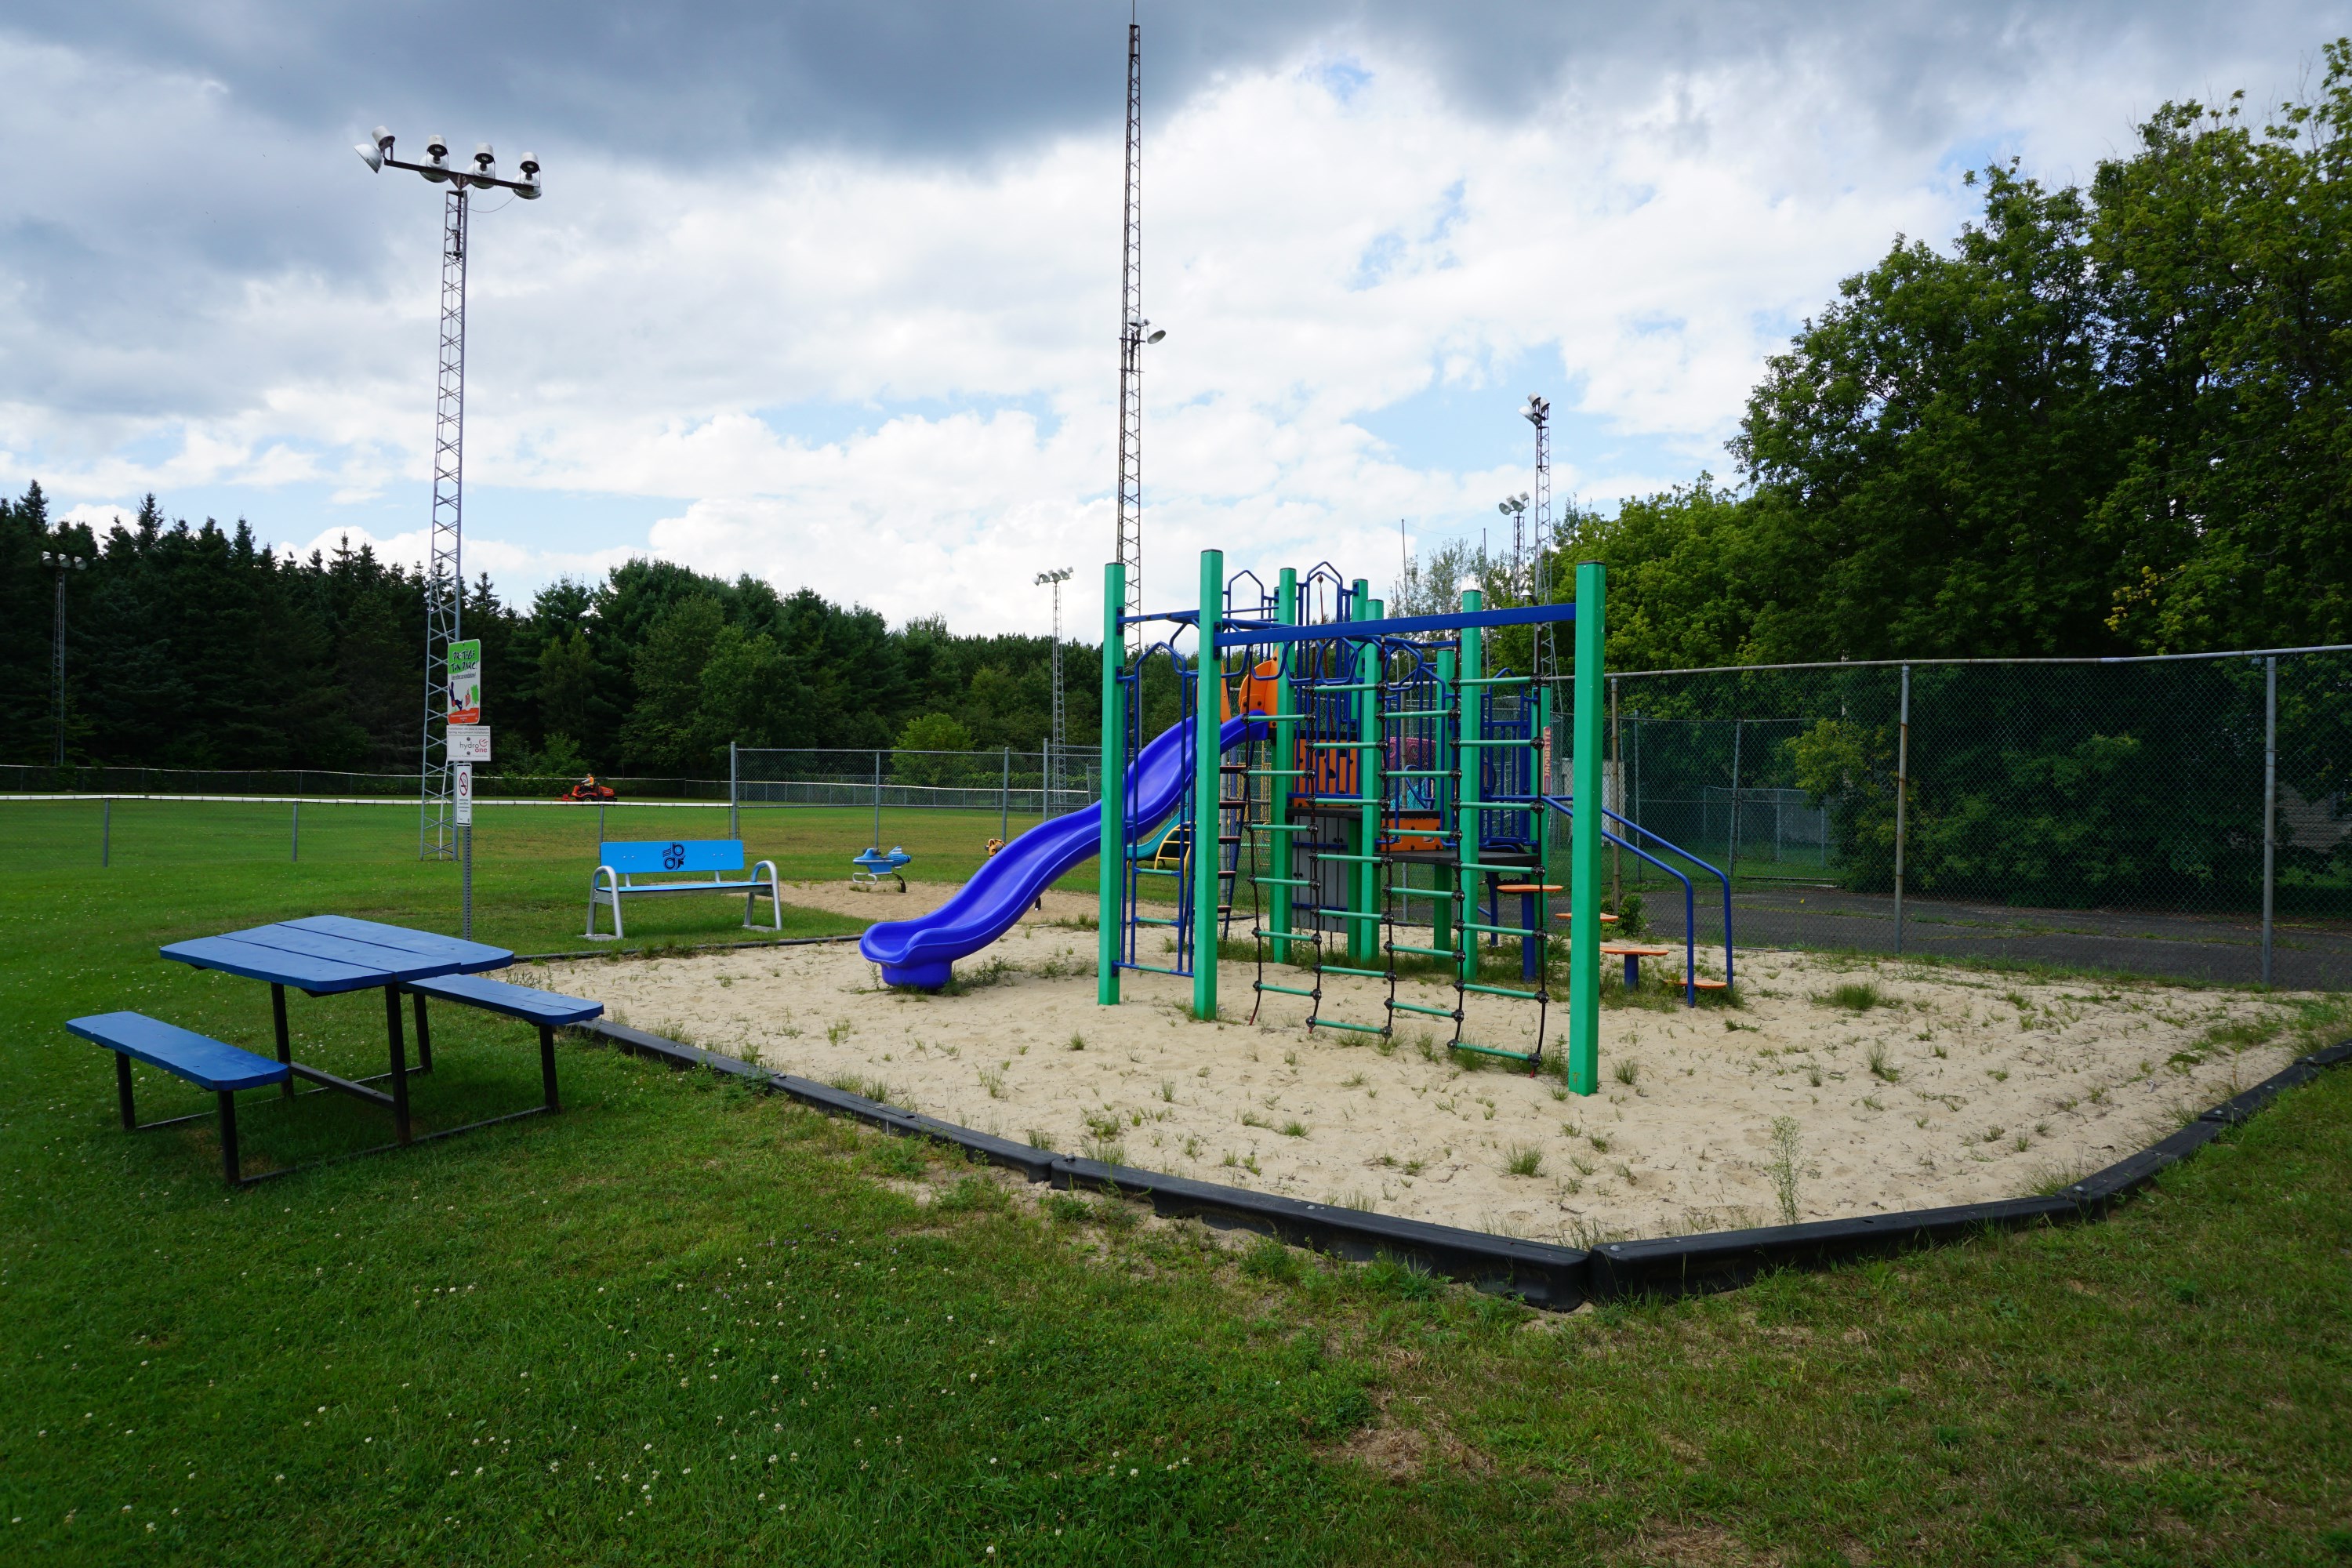 View of the Curran play structures